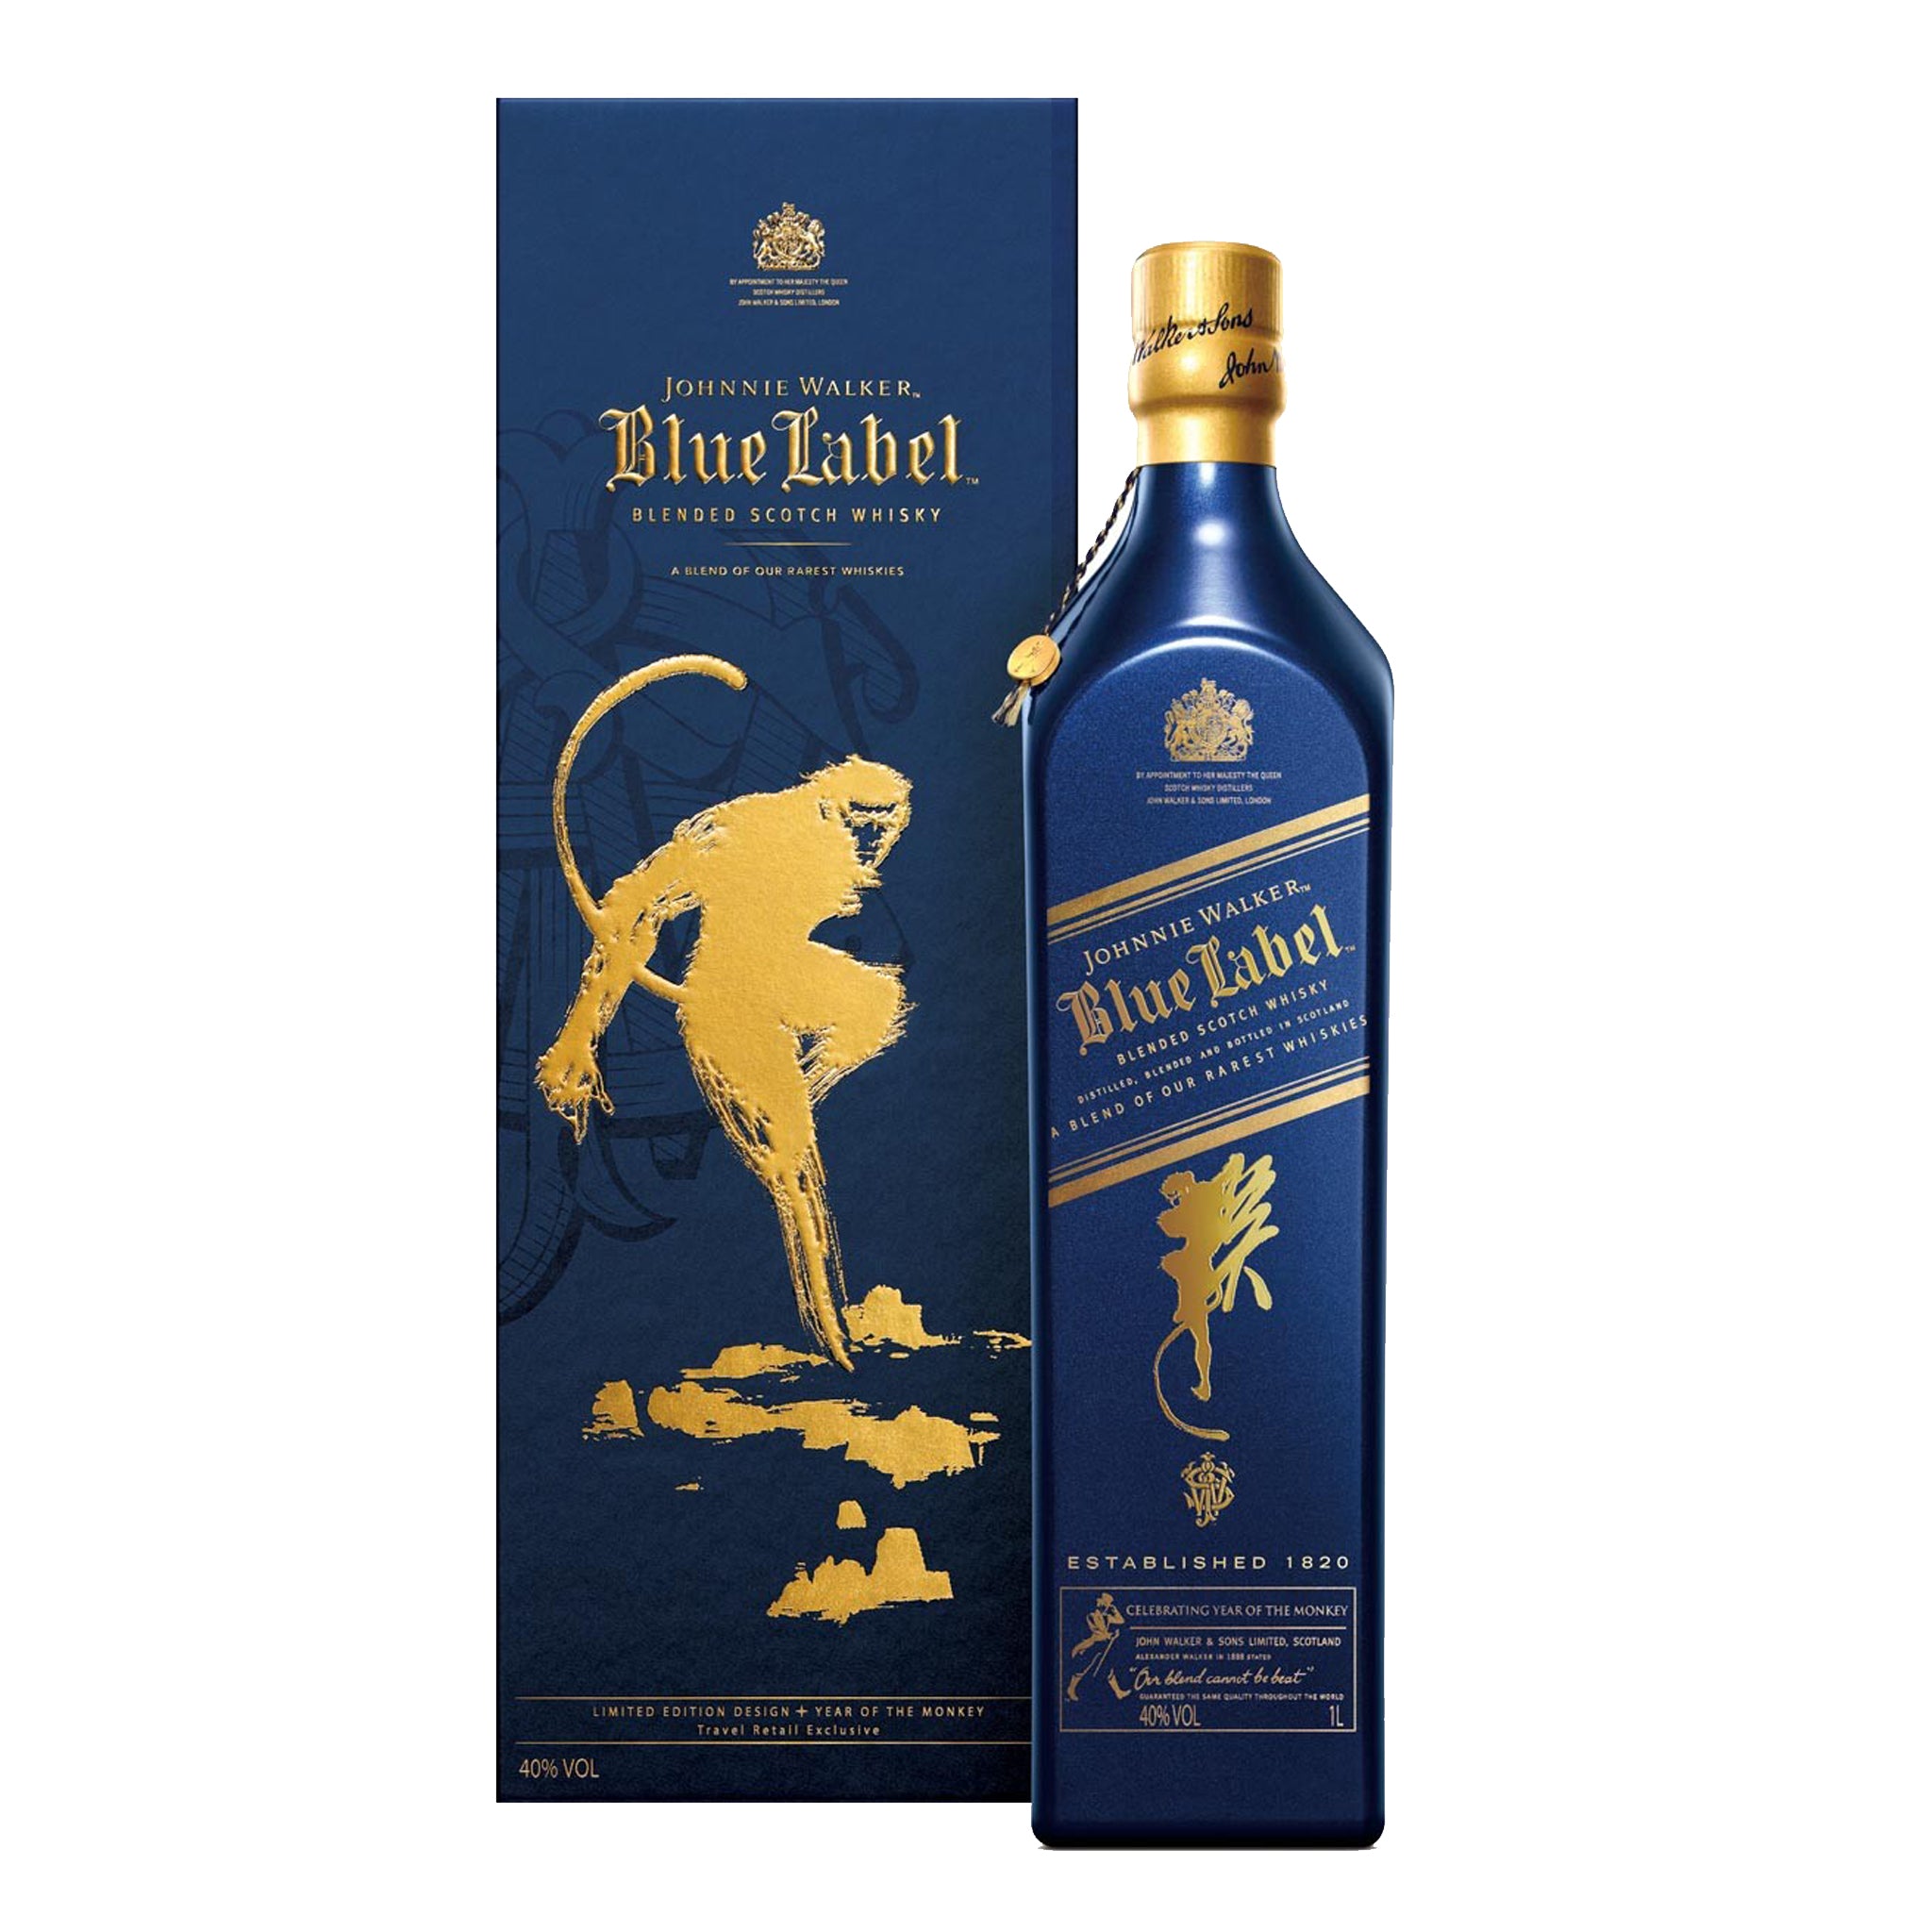 Johnnie Walker Blue Label - Year of the Monkey | The